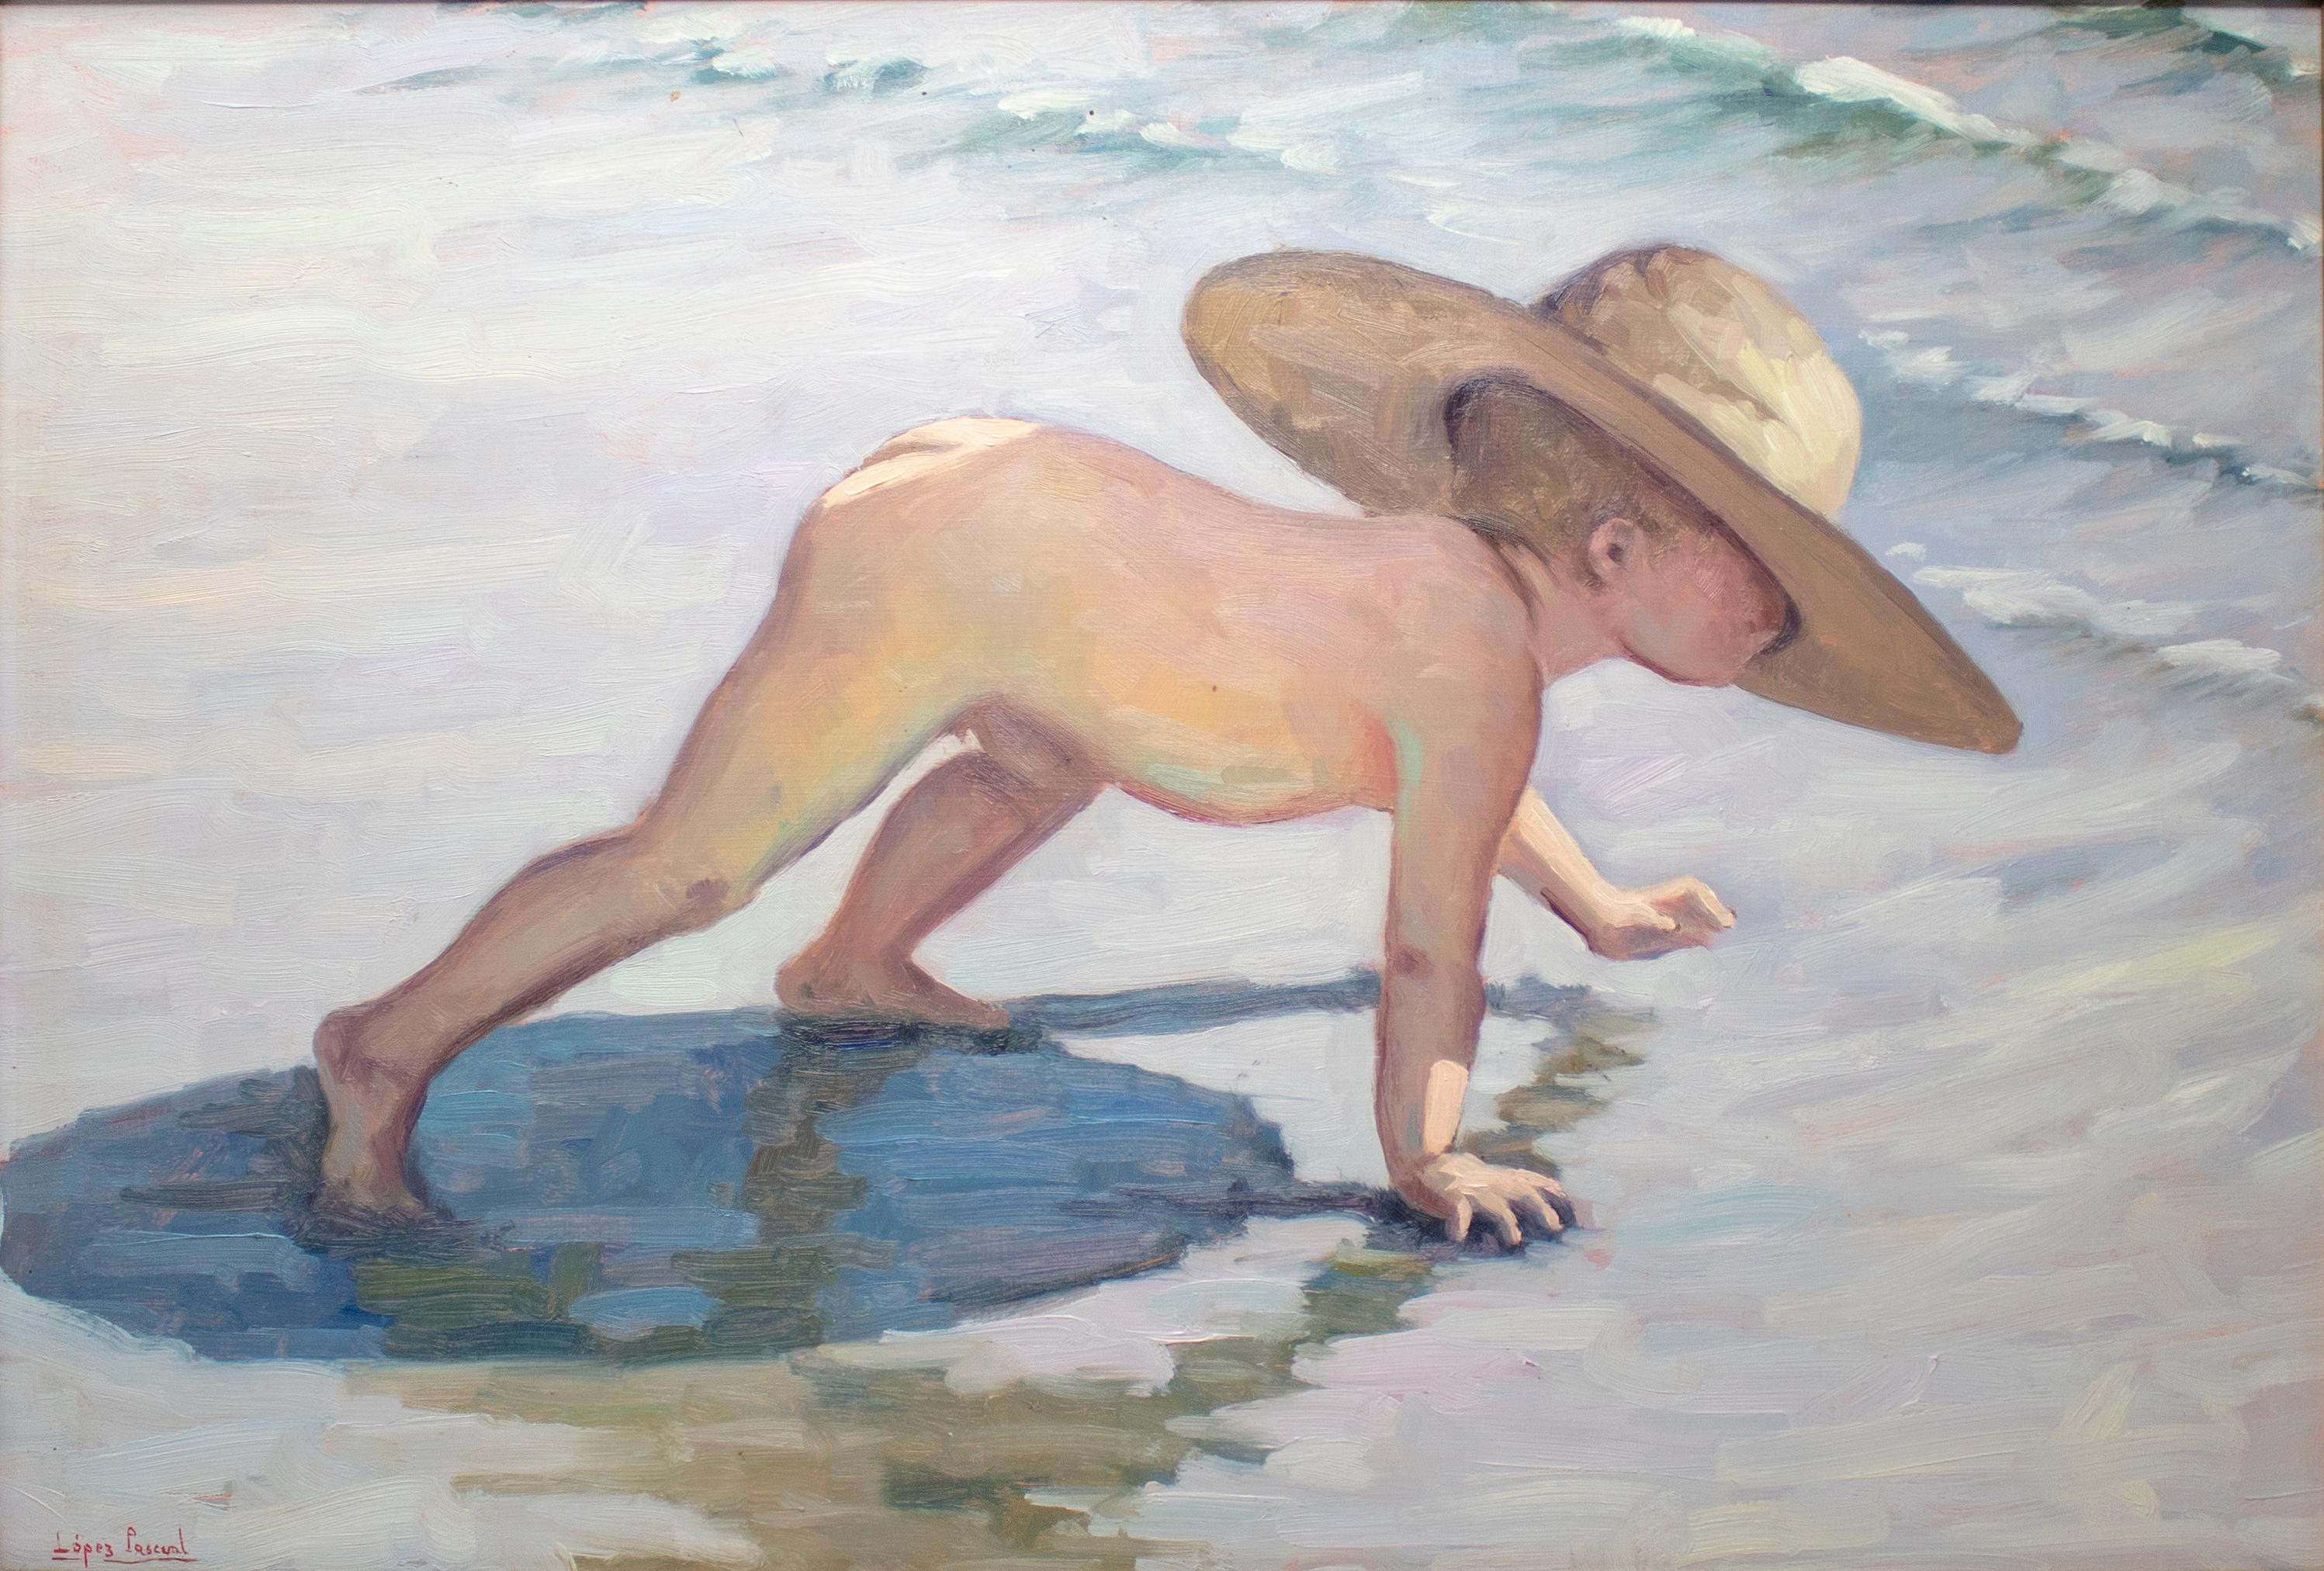 1950s López Pascual oil on canvas of boy in beach.

Dimensions with frame: 48 x 64.5 x 5.5.